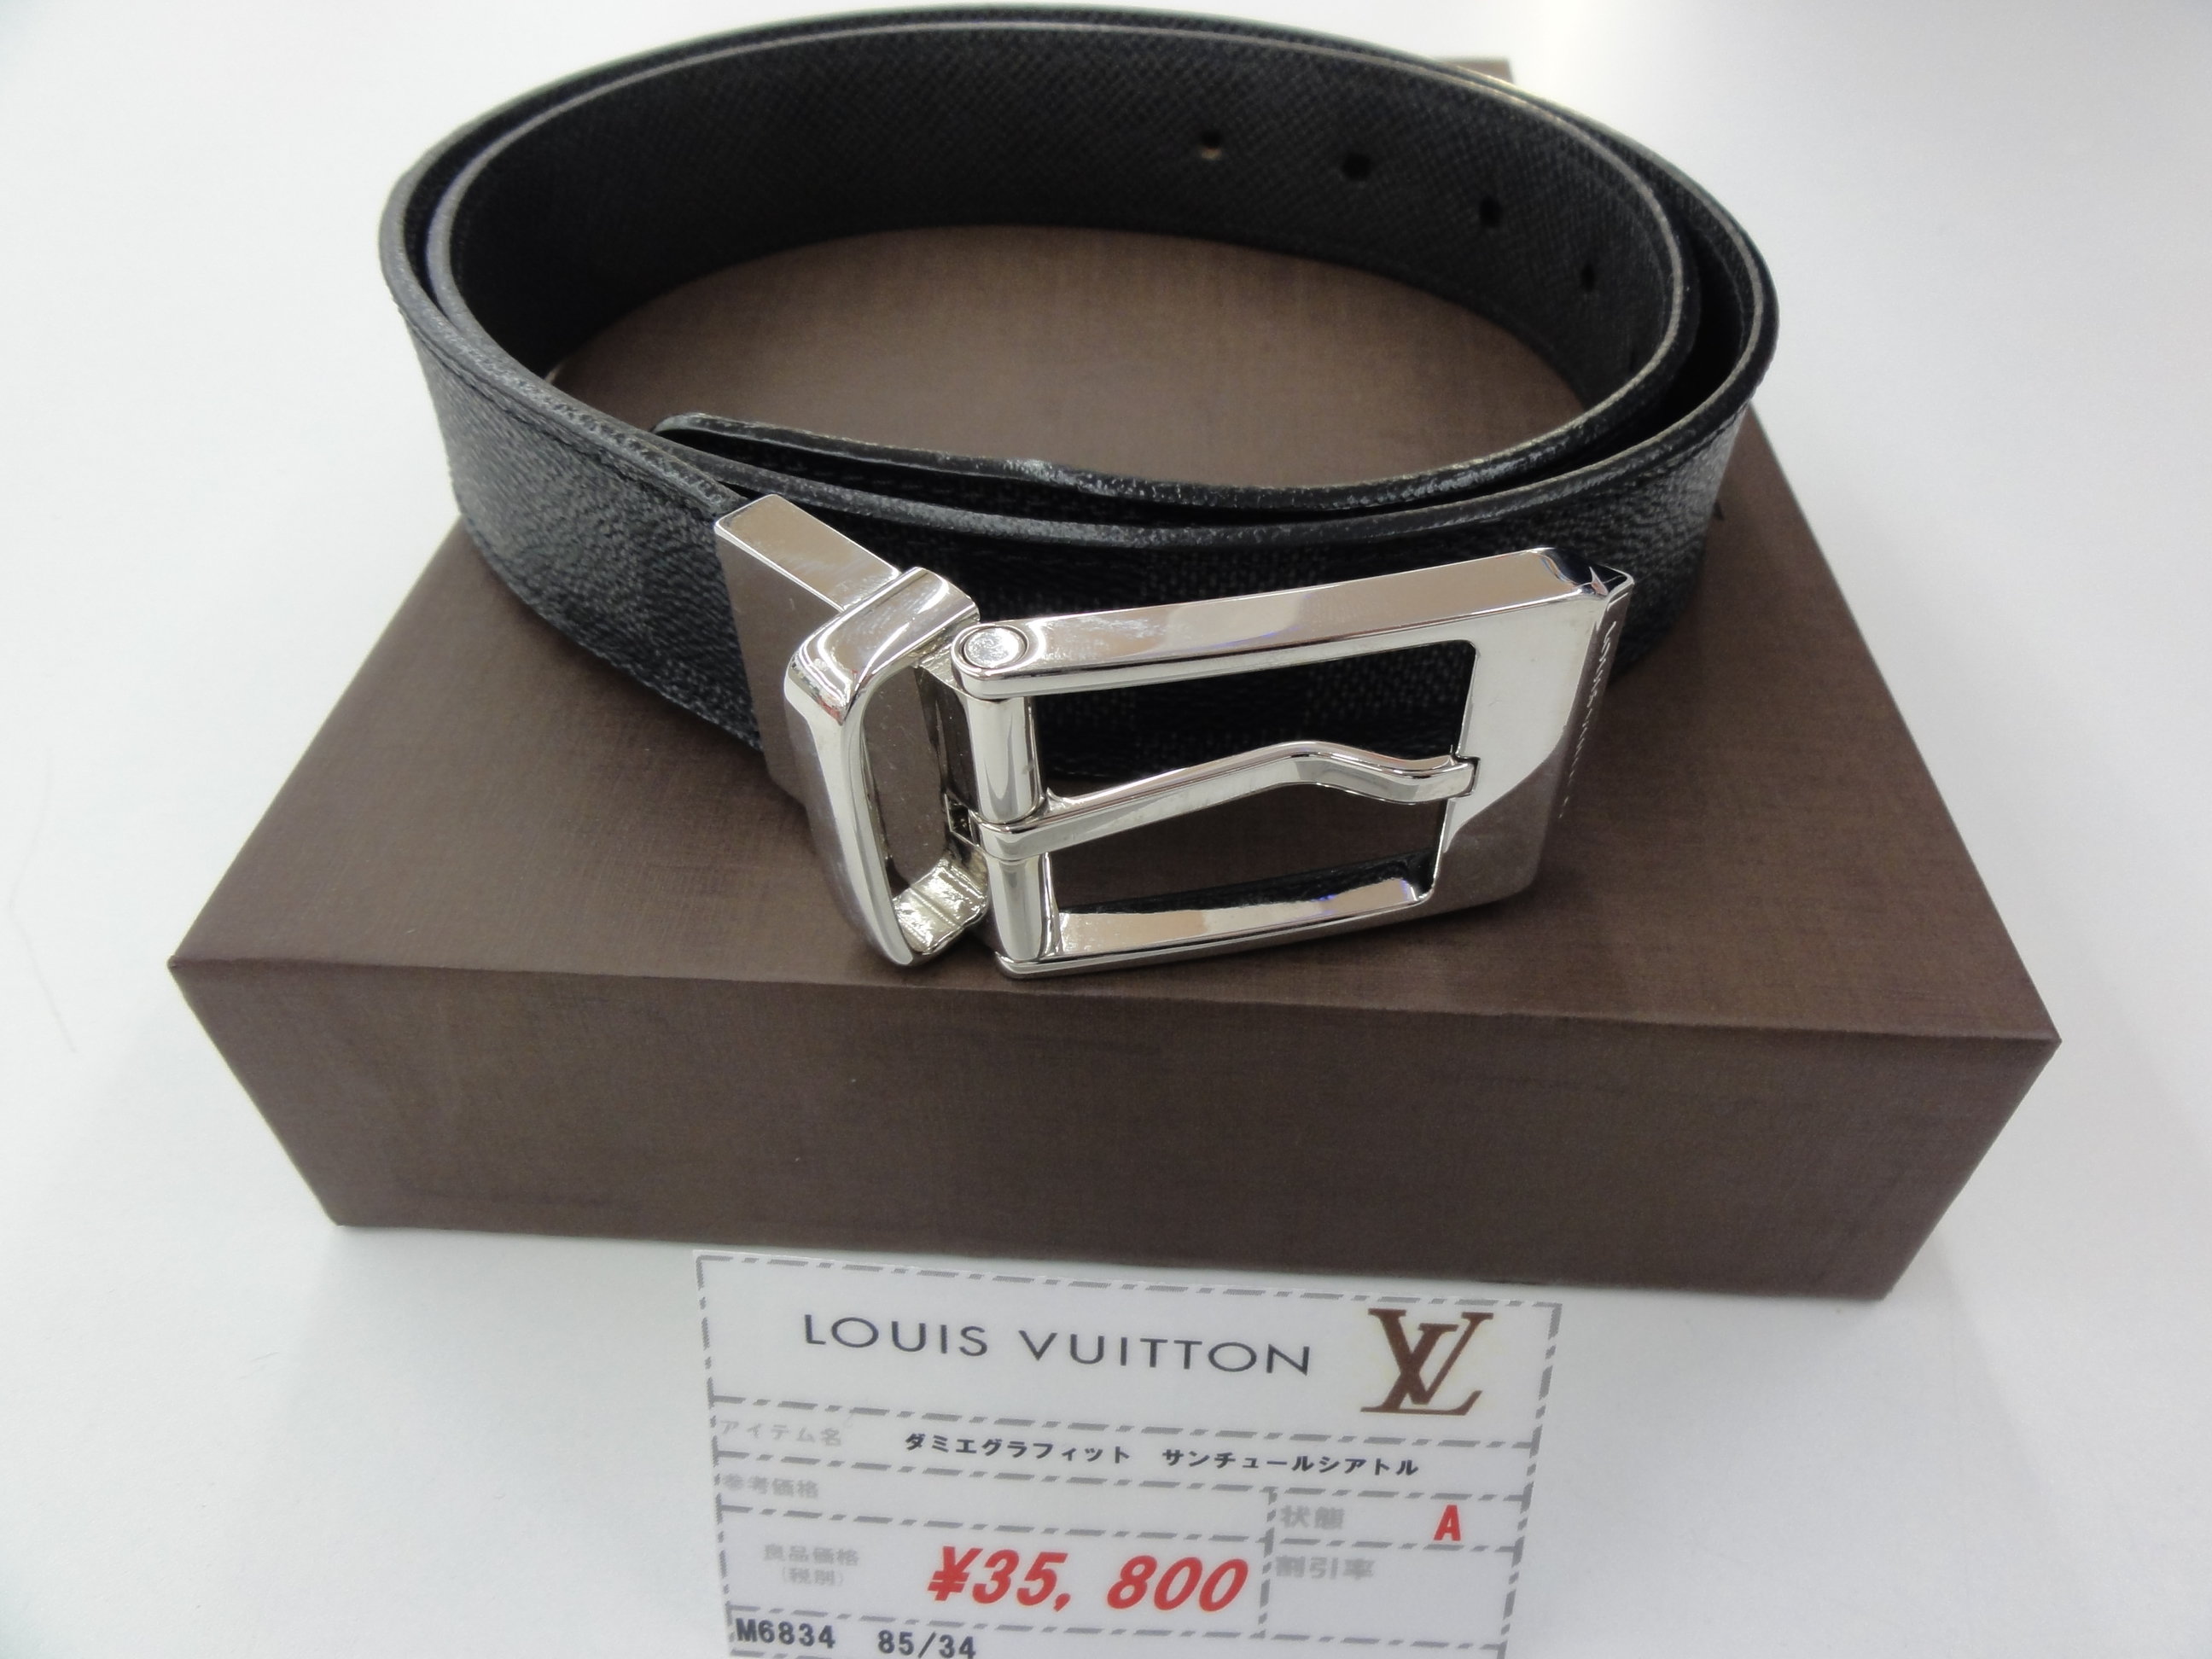 LOUIS VUITTON/ルイヴィトン M6834 ダミエグラフィット サンチュール 